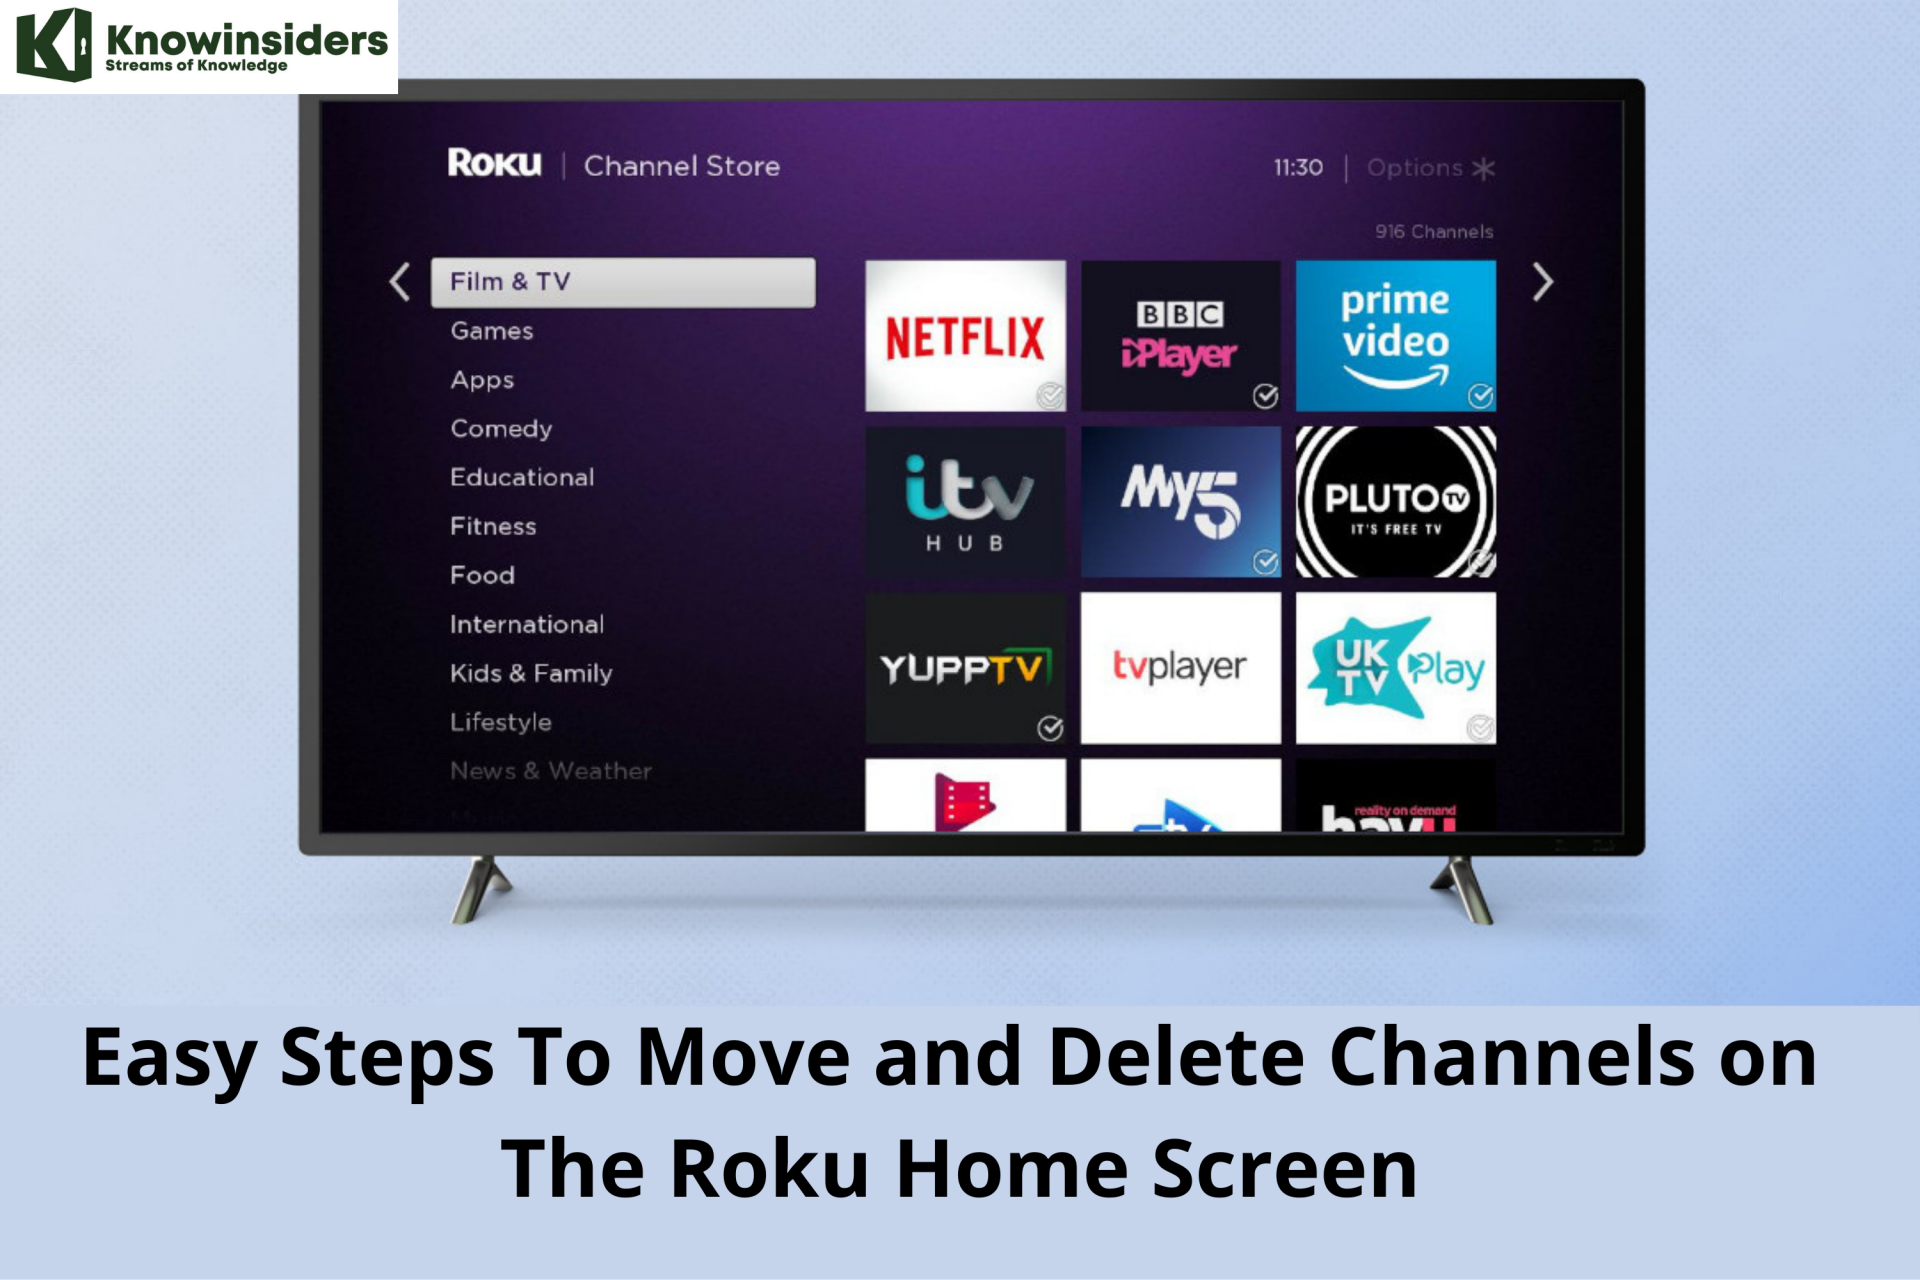 Easy Steps To Move and Delete Channels on The Roku Home Screen